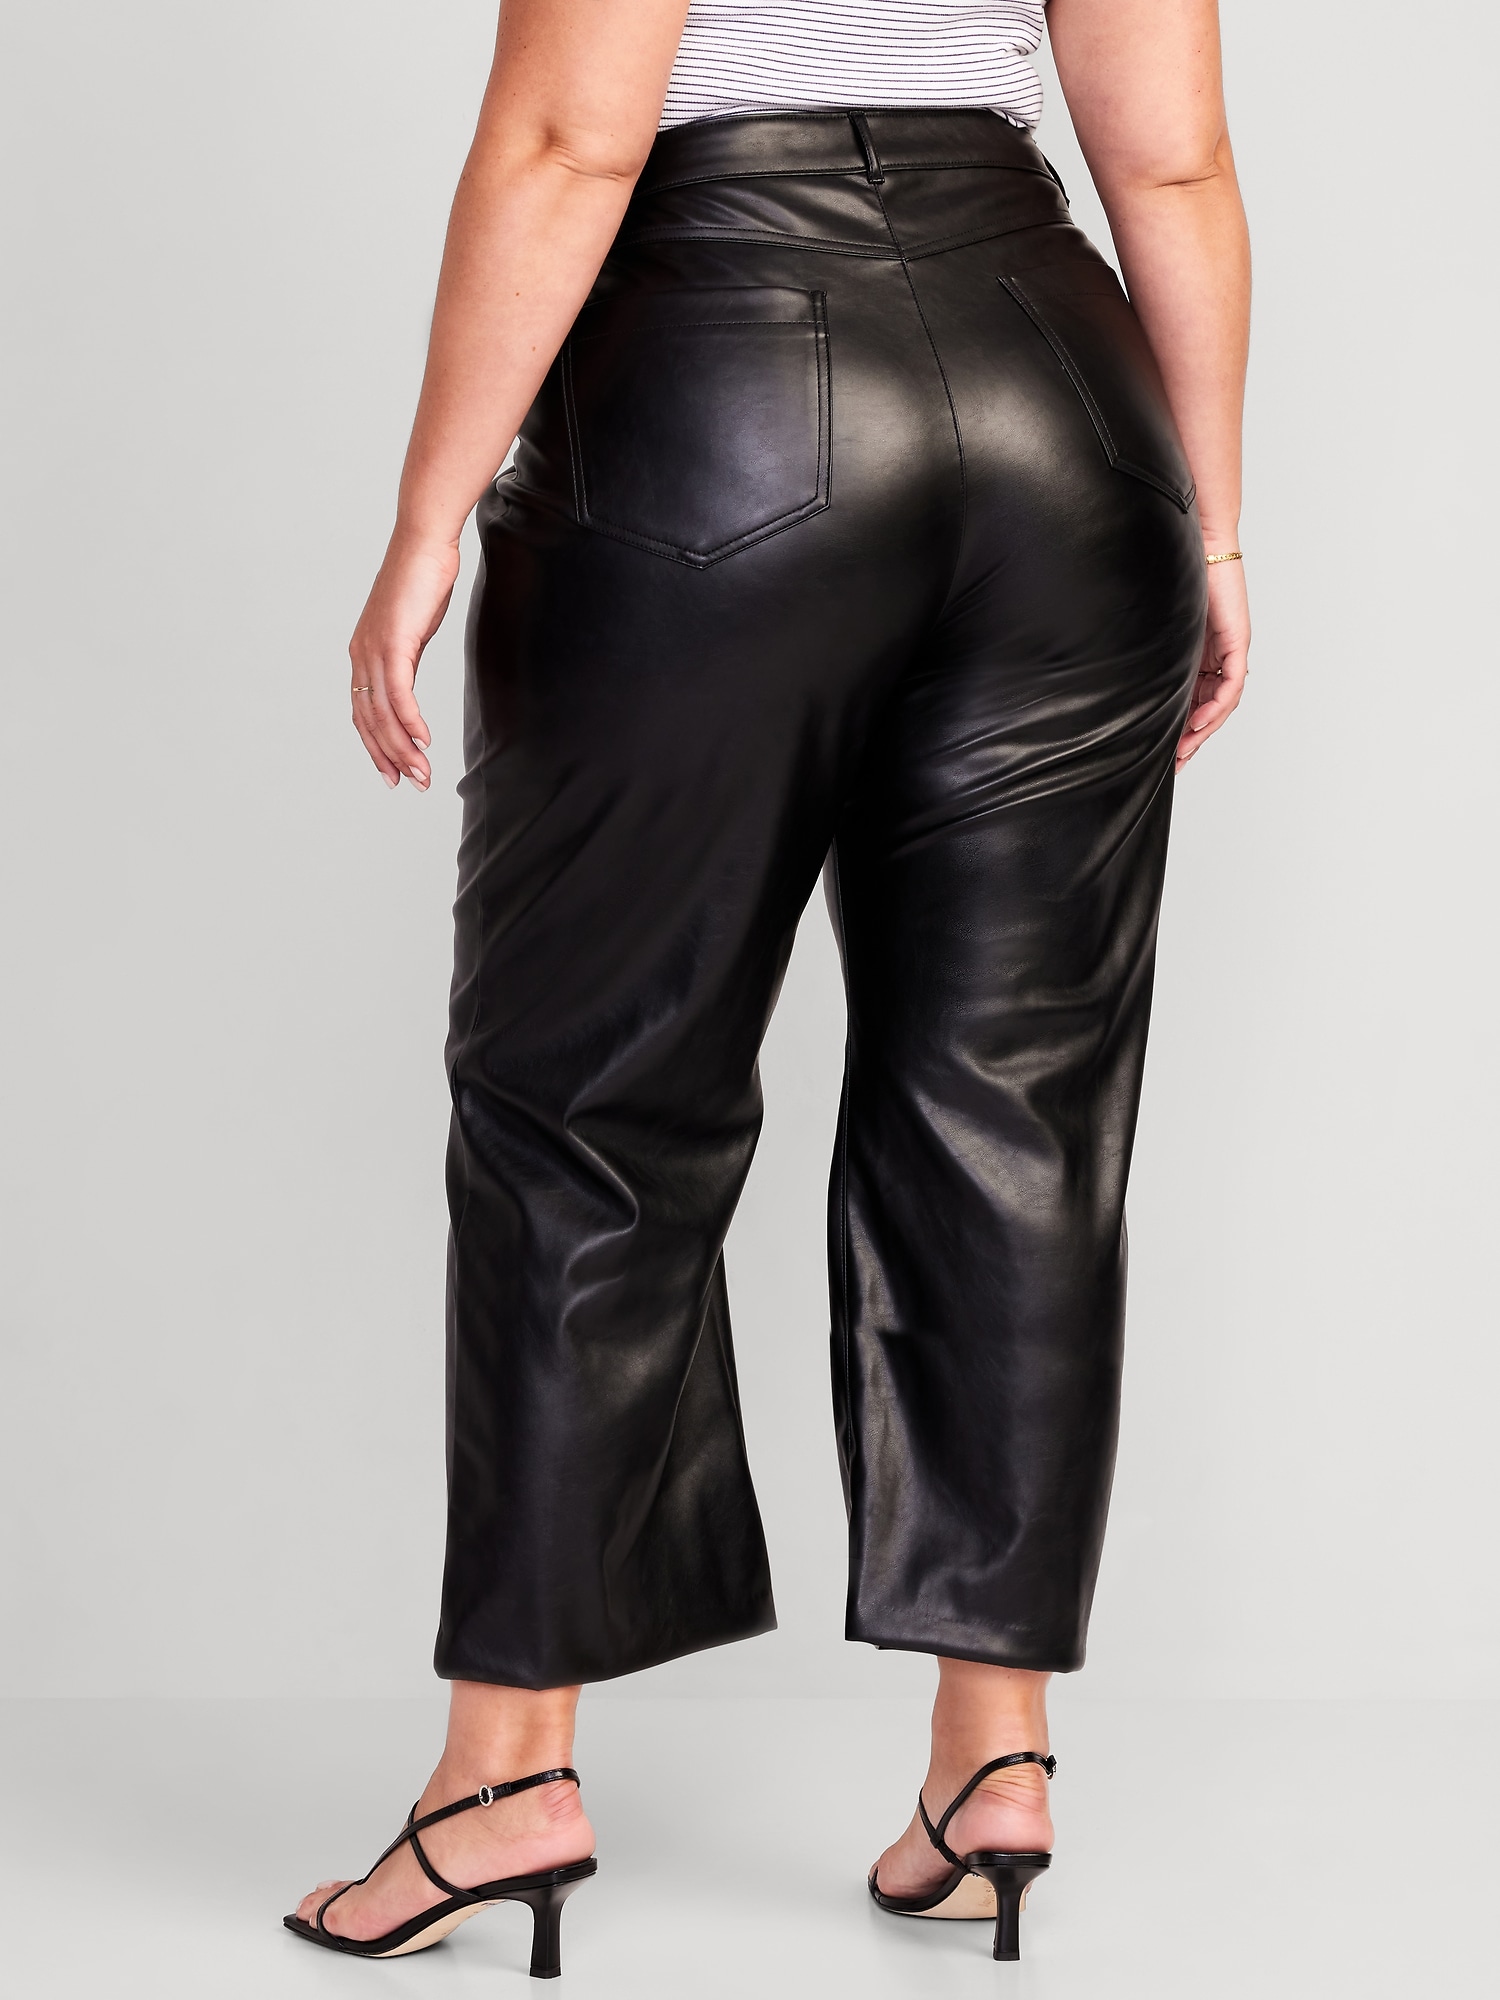 Leather Pants for Women High Waisted Pleather Pants Plus Size Faux